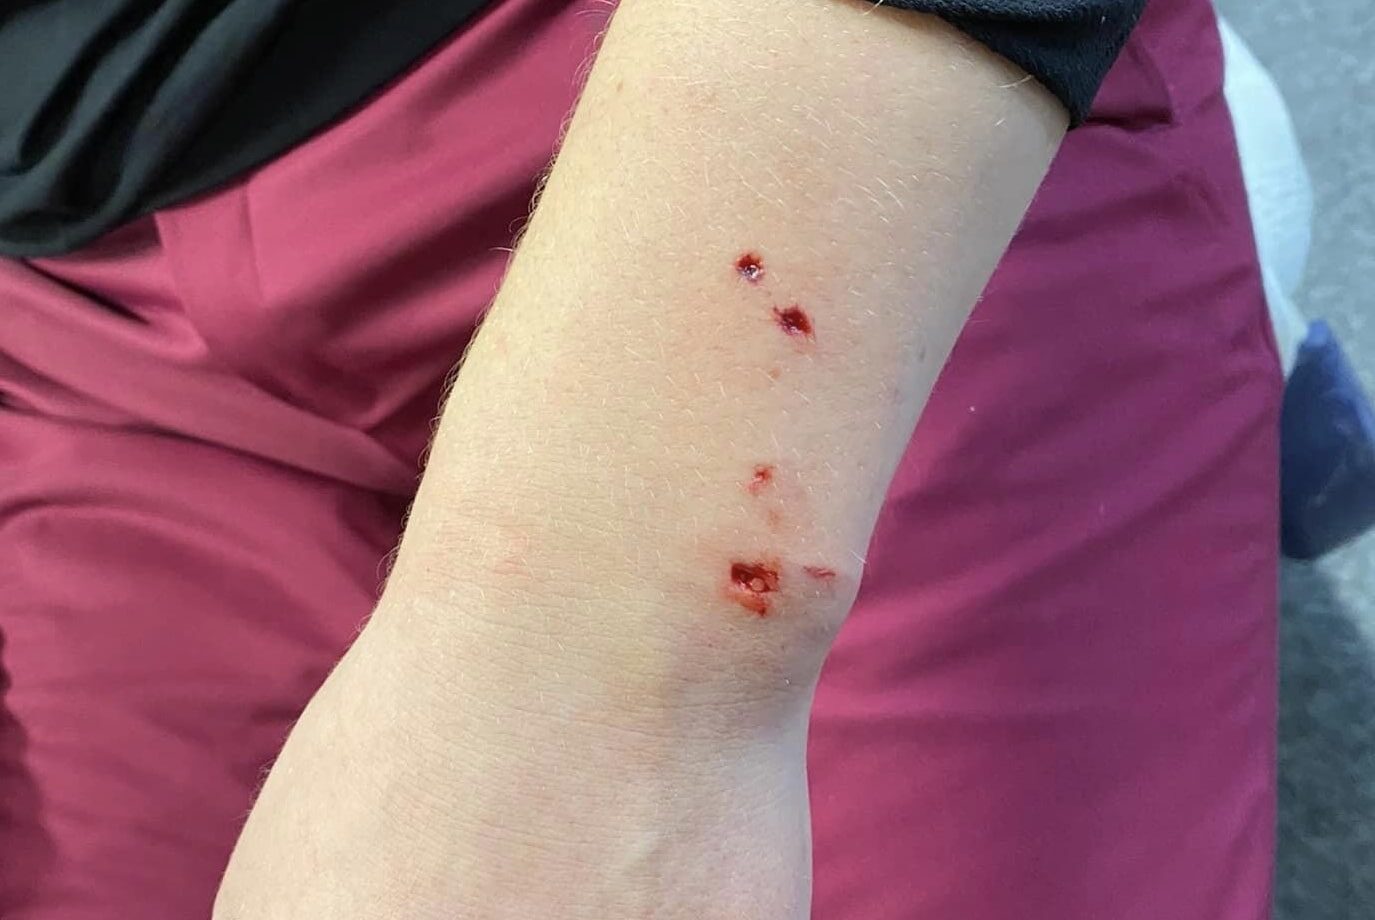 The bite wound on the arm of the female skier, identified only as ‘Sofia’ on social media